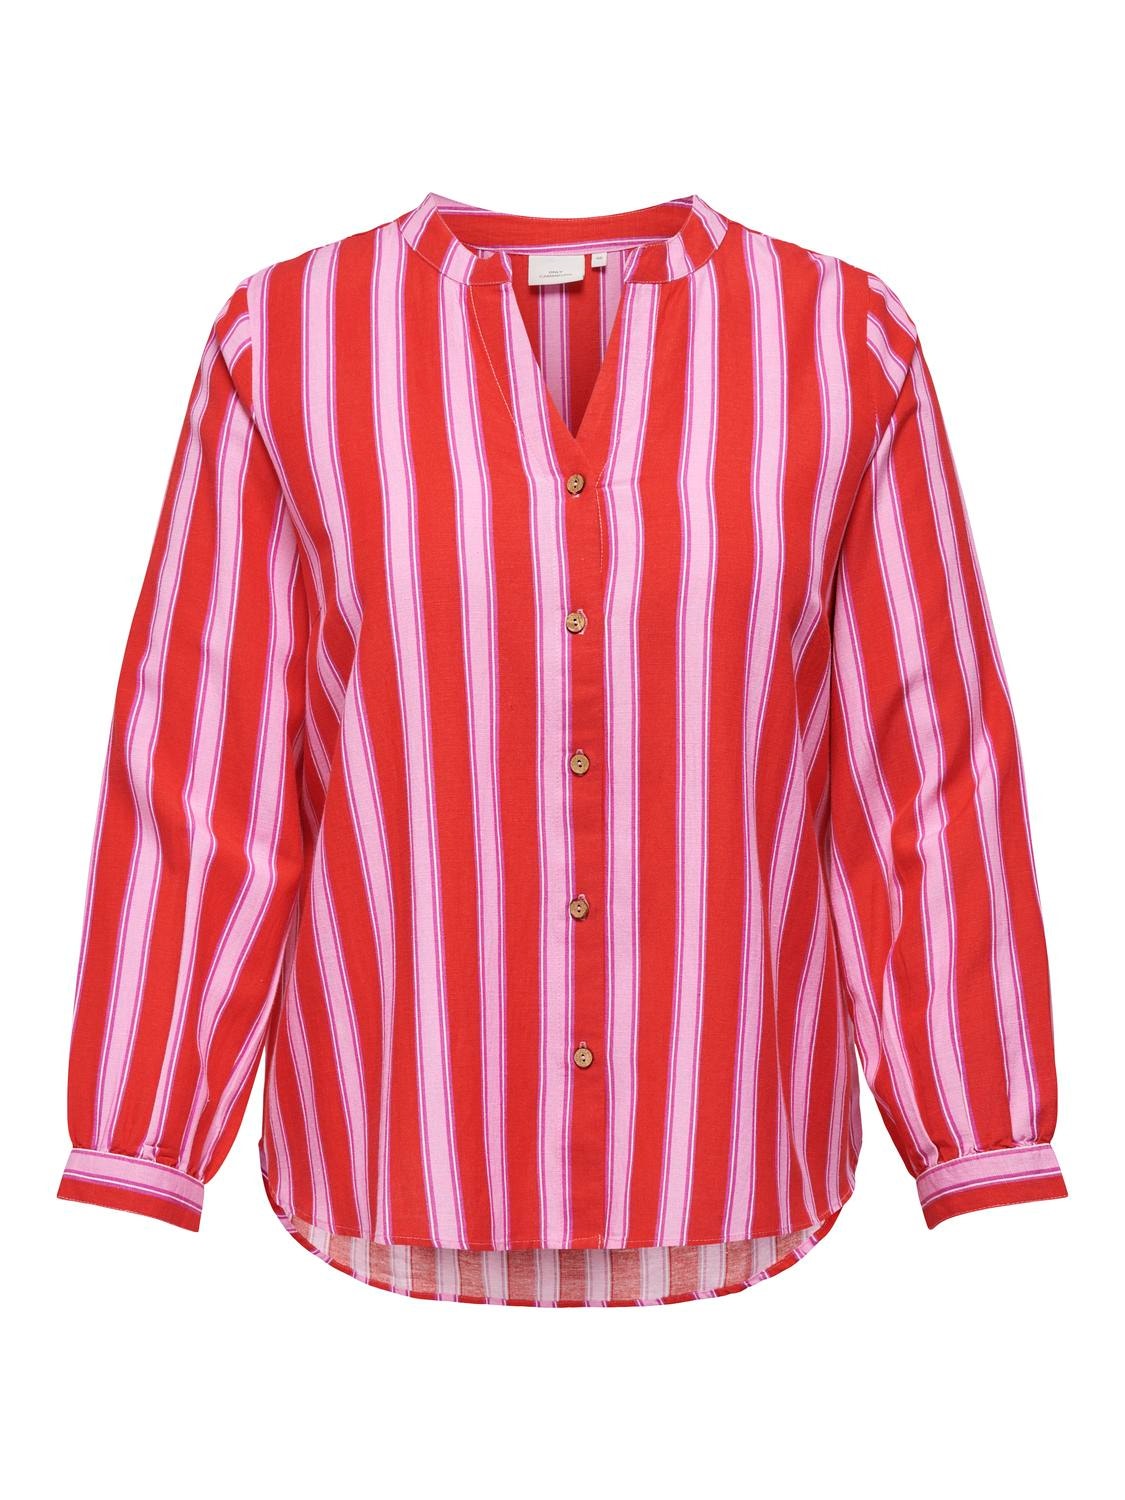 ONLY Regular Fit China Collar Buttoned cuffs Balloon sleeves Shirt -Flame Scarlet - 15315807